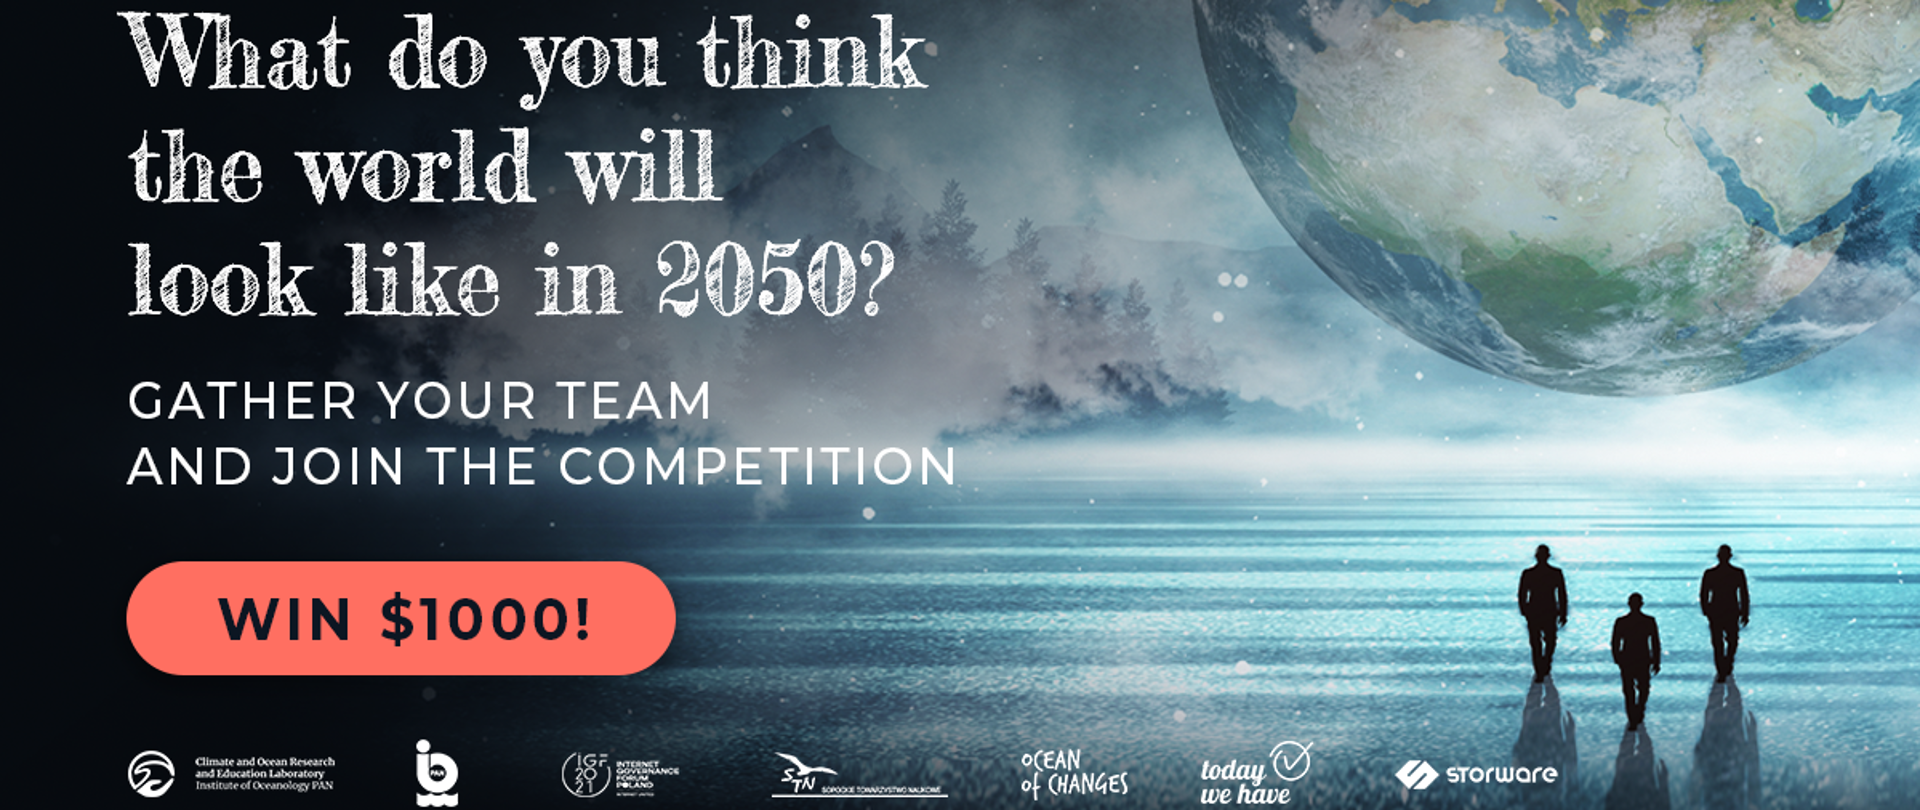 What do you think the world will look like in 2050? Gather your team and join the competition. win 1000$